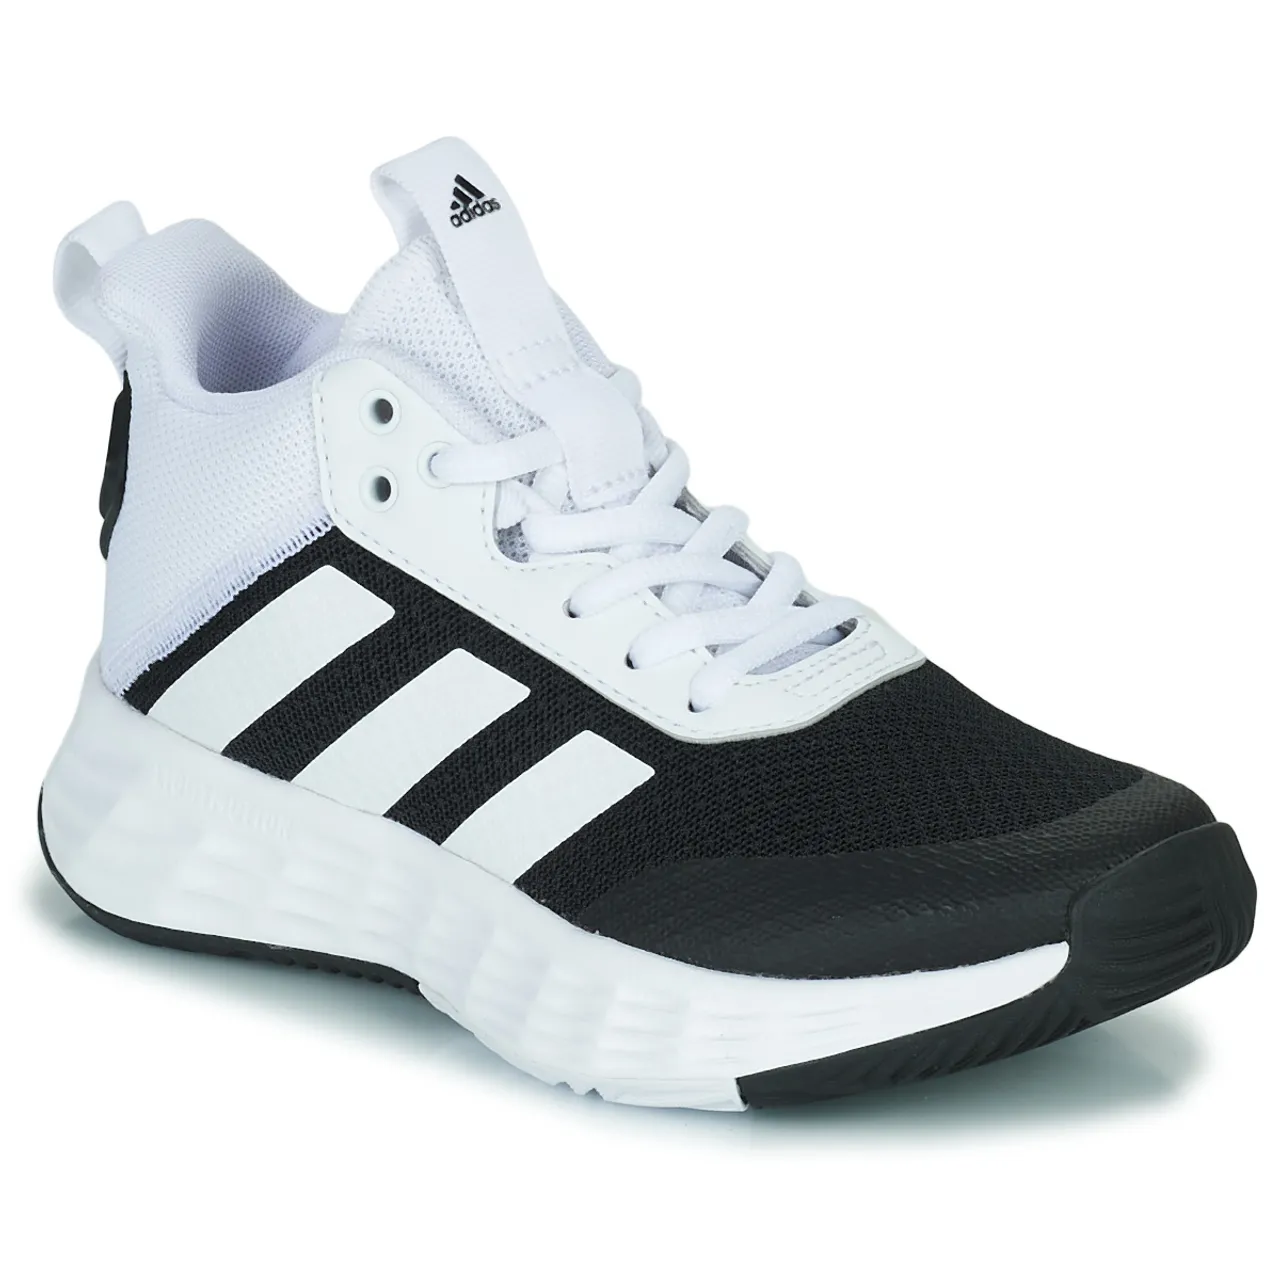 adidas  OWNTHEGAME 2.0 K  boys's Children's Shoes (High-top Trainers) in Black